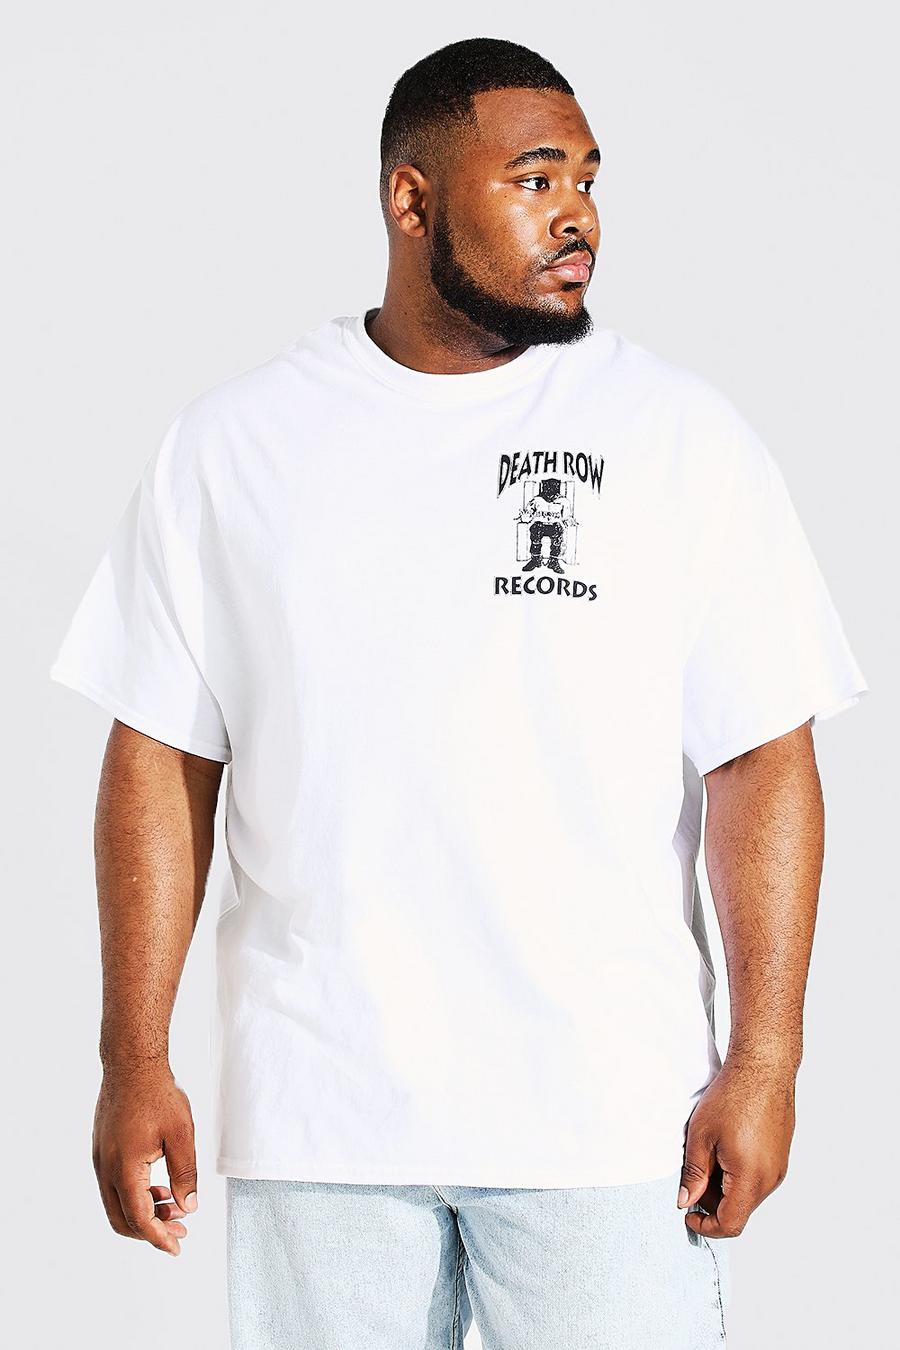 T-shirt Plus Size ufficiale Death Row Records, White bianco image number 1